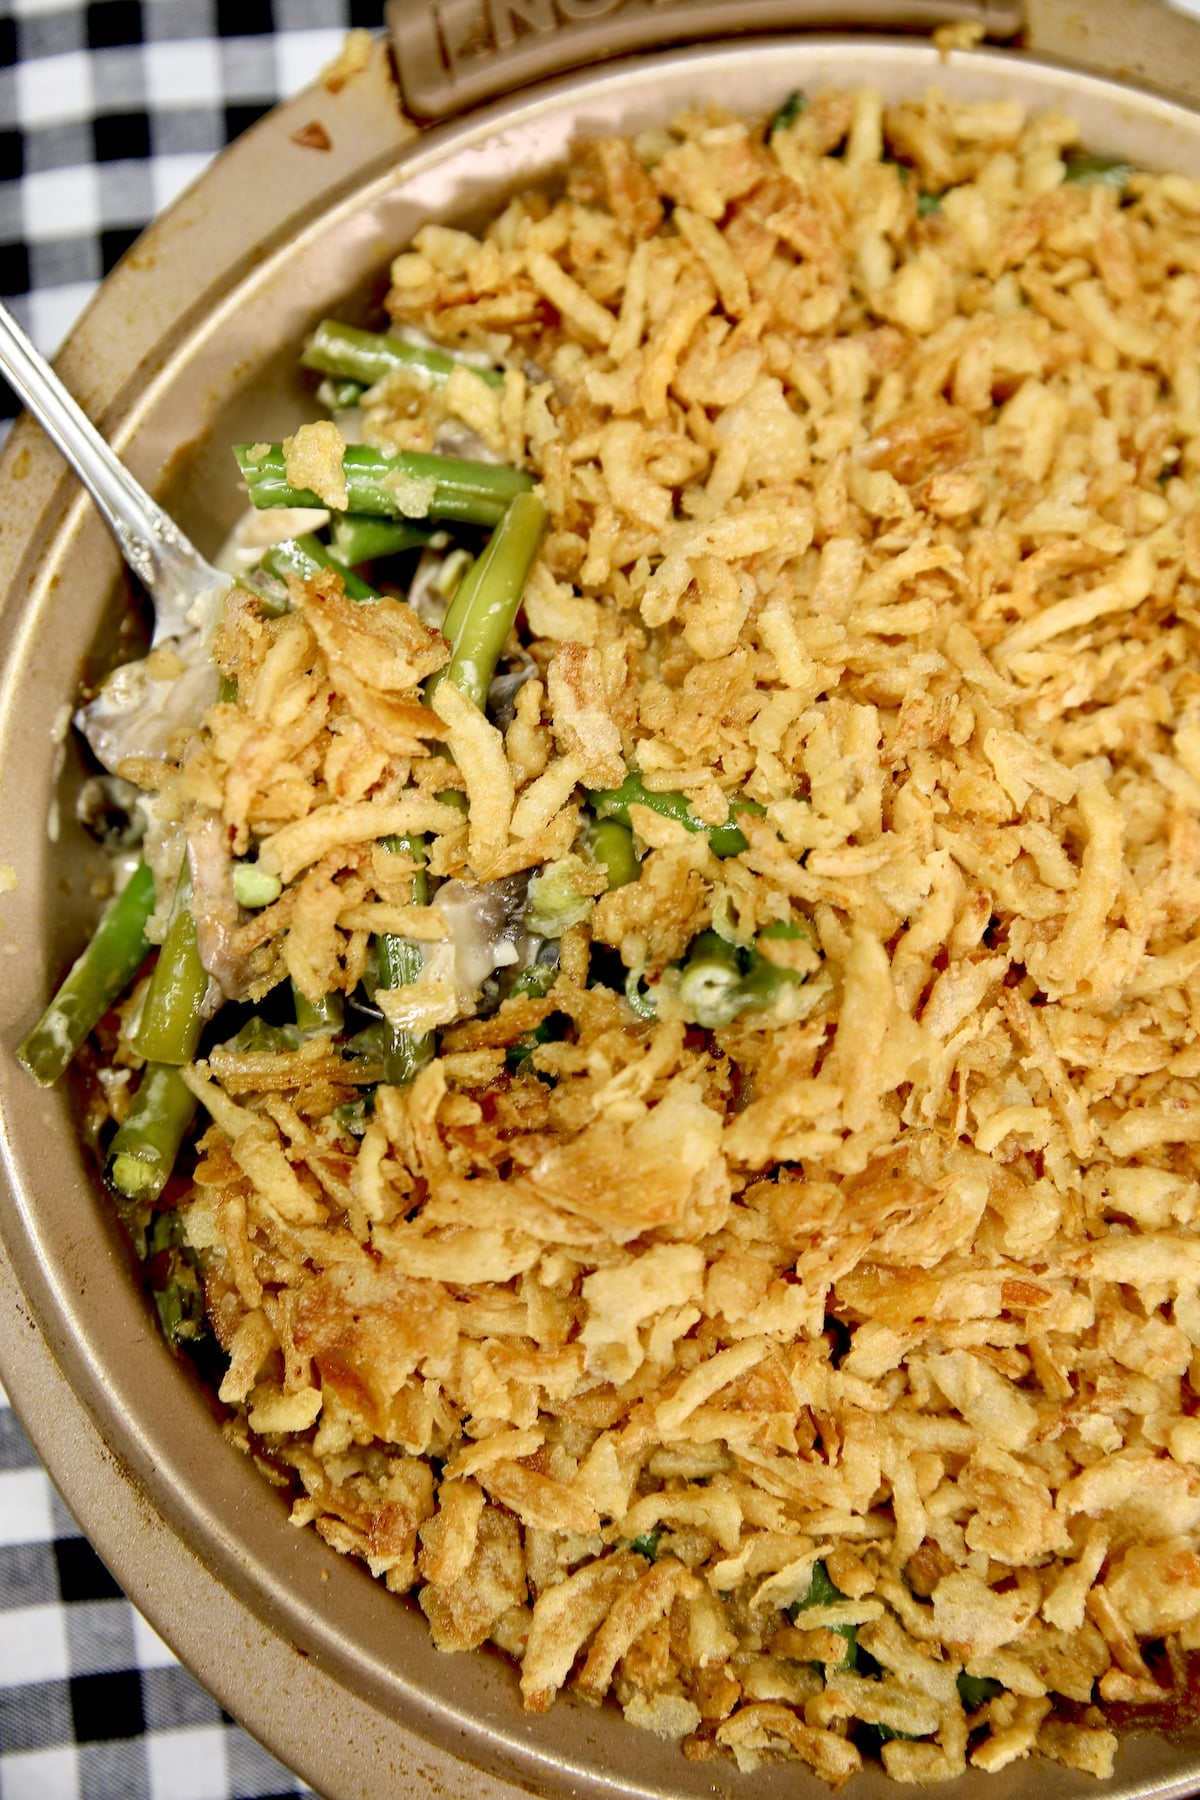 Pan of green bean casserole with serving spoon in the dish.